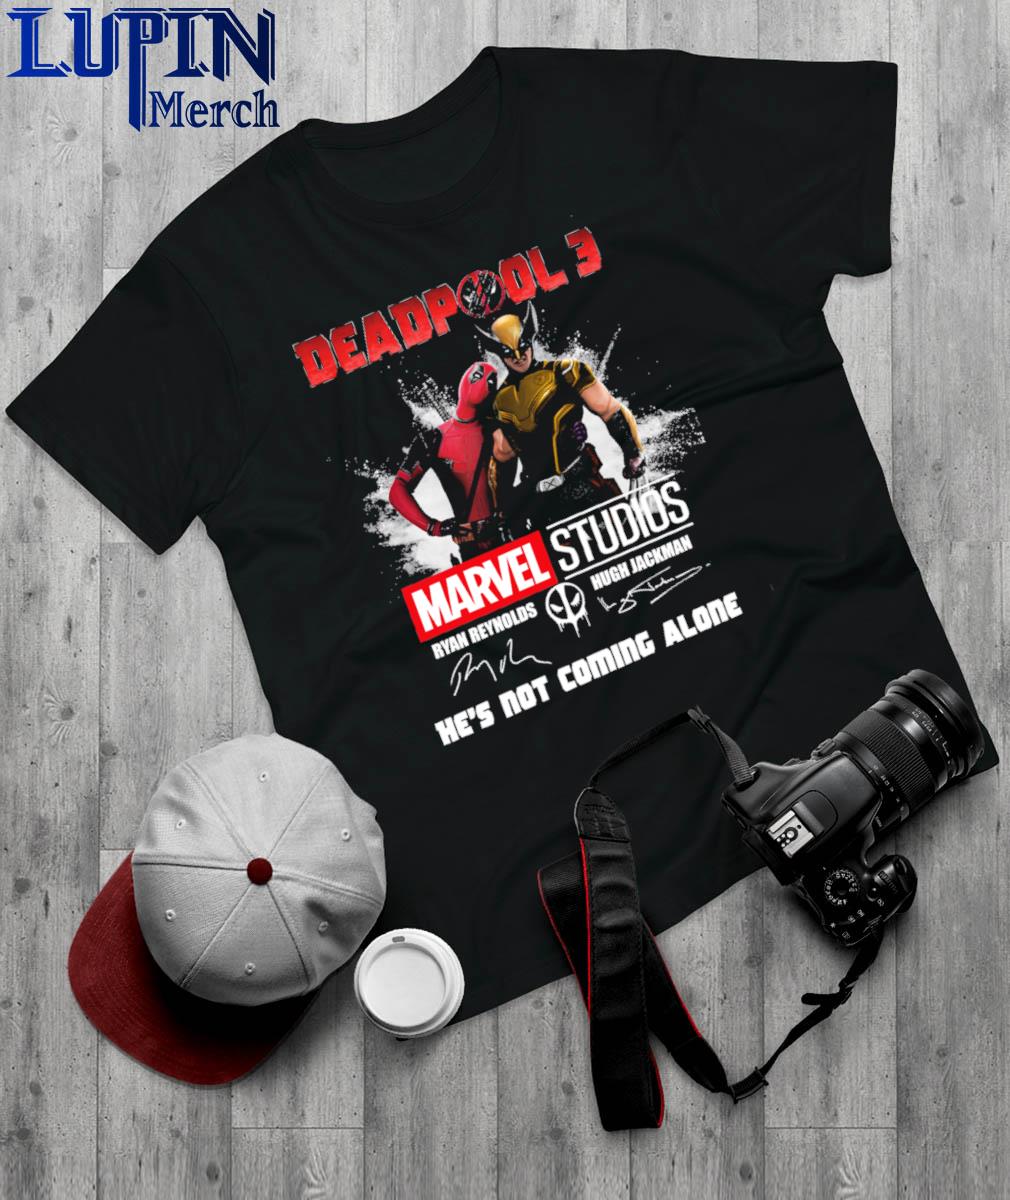 Deadpool 3 He's Not Coming Alone Poster, Deadpool 3 Coming Soon Poster sold  by DanieCole, SKU 24604597